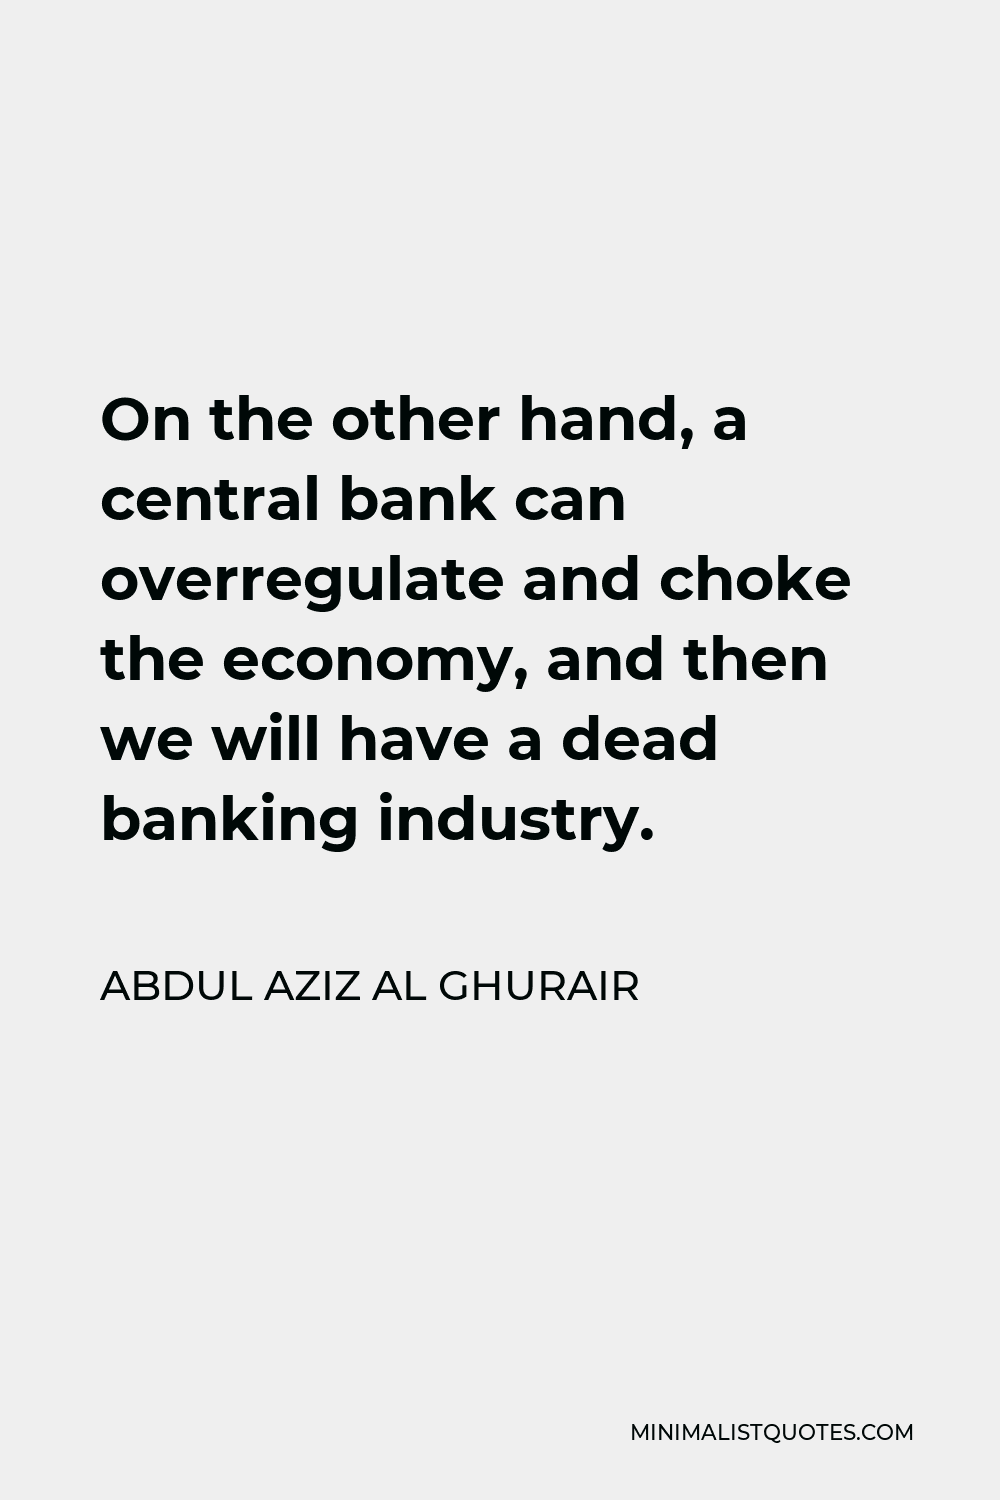 Abdul Aziz Al Ghurair Quote - On the other hand, a central bank can overregulate and choke the economy, and then we will have a dead banking industry.